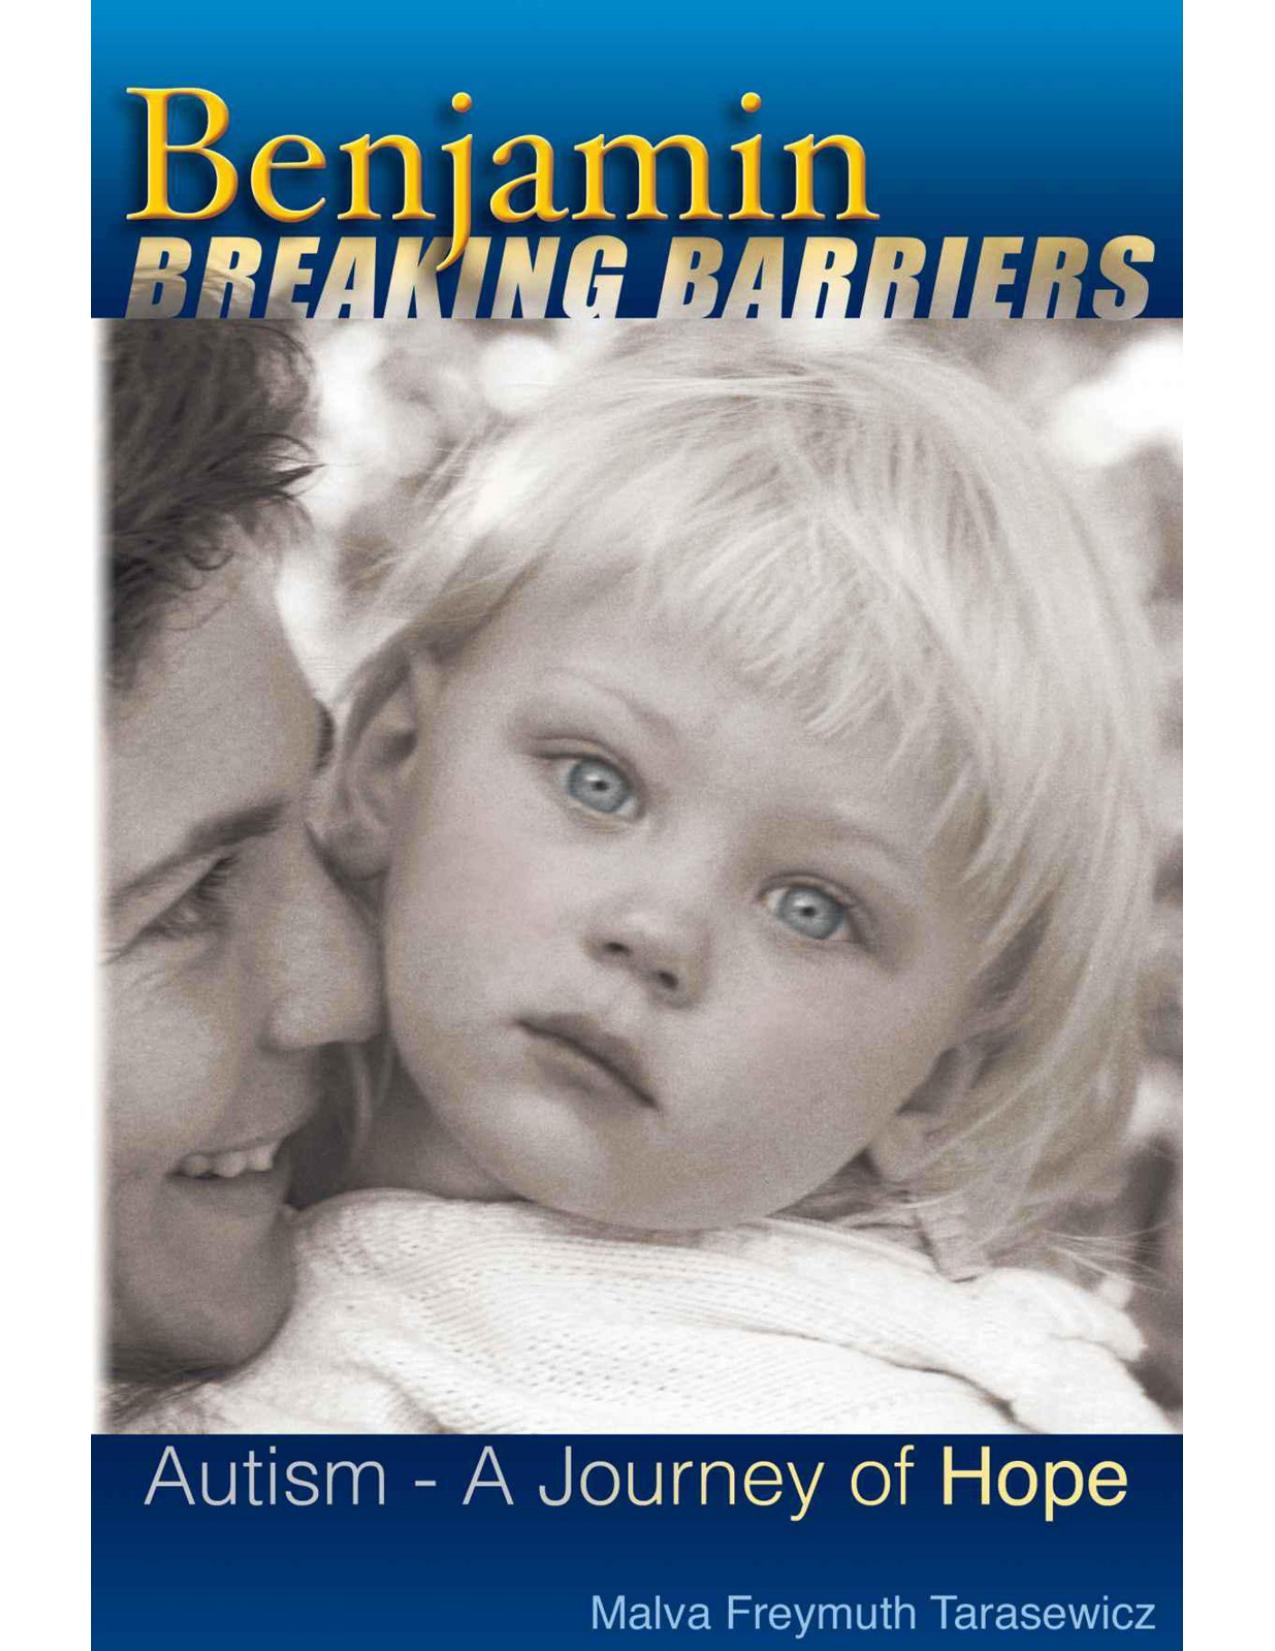 Benjamin Breaking Barriers: Autism - A Journey of Hope by Malva Freymuth Tarasewicz